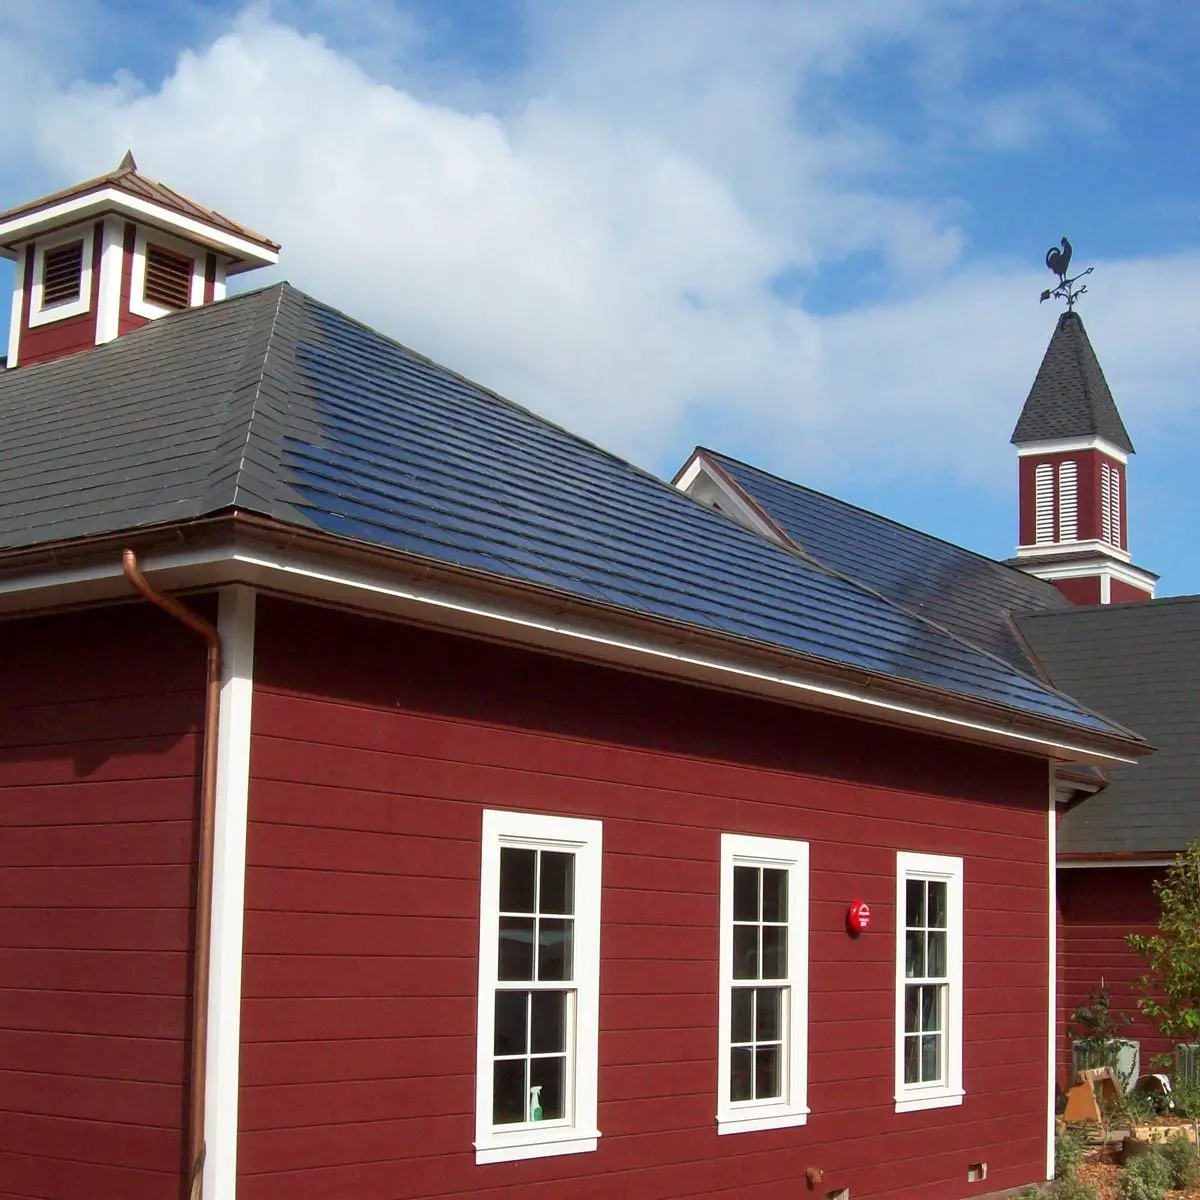 Are PV Panels Are Right For Your Roof?